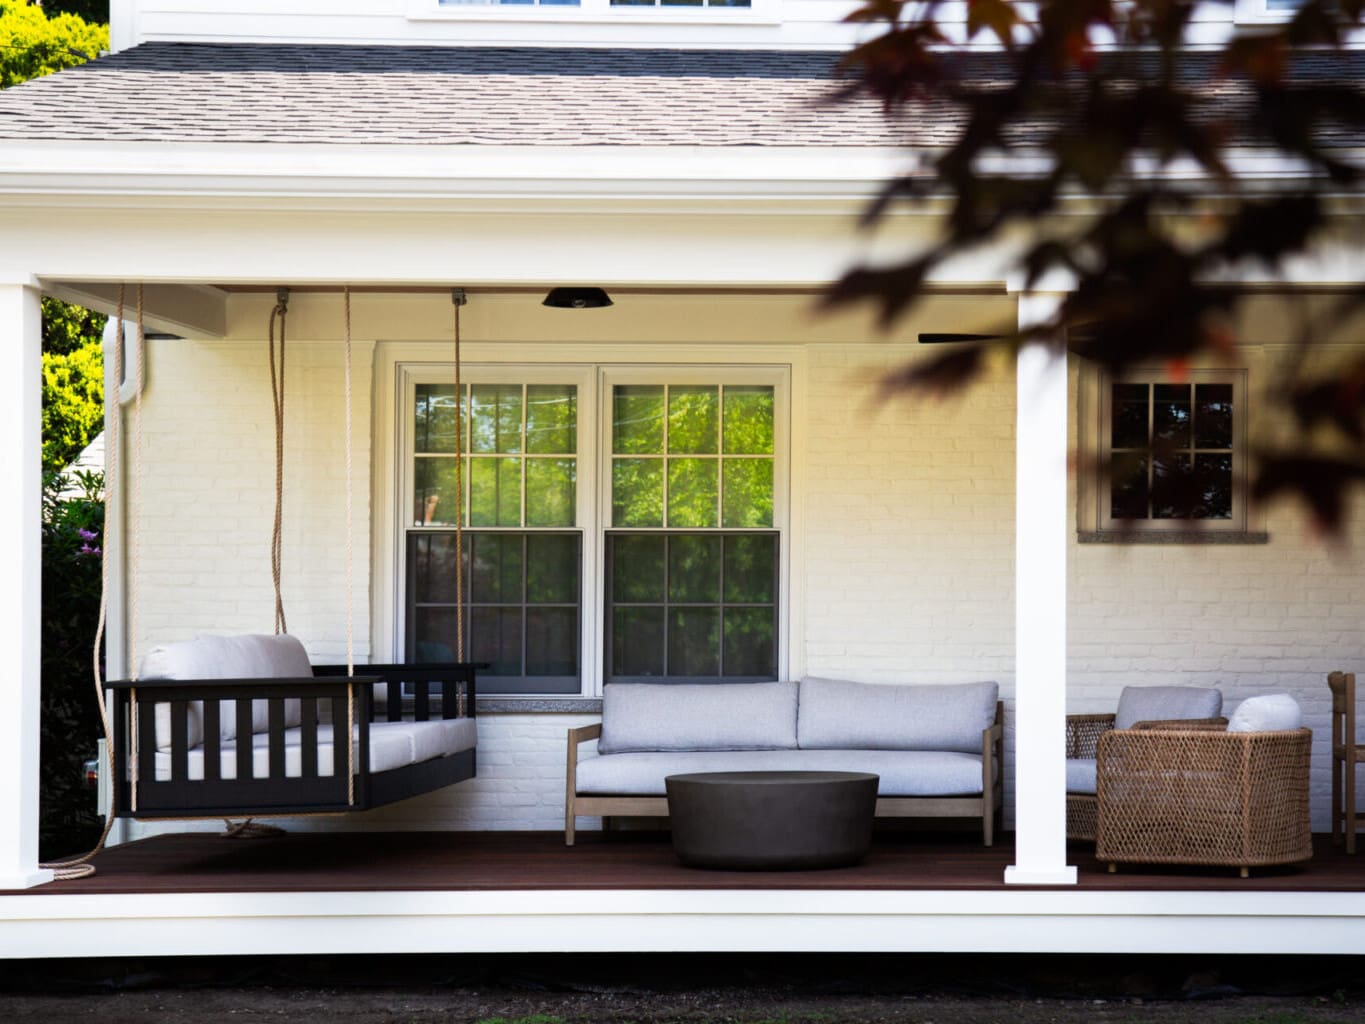 A photo of a farmers porch with white square pillars, white brick wall, dark brown wooden flooring, and assorted outdoor furniture with grey cushions.